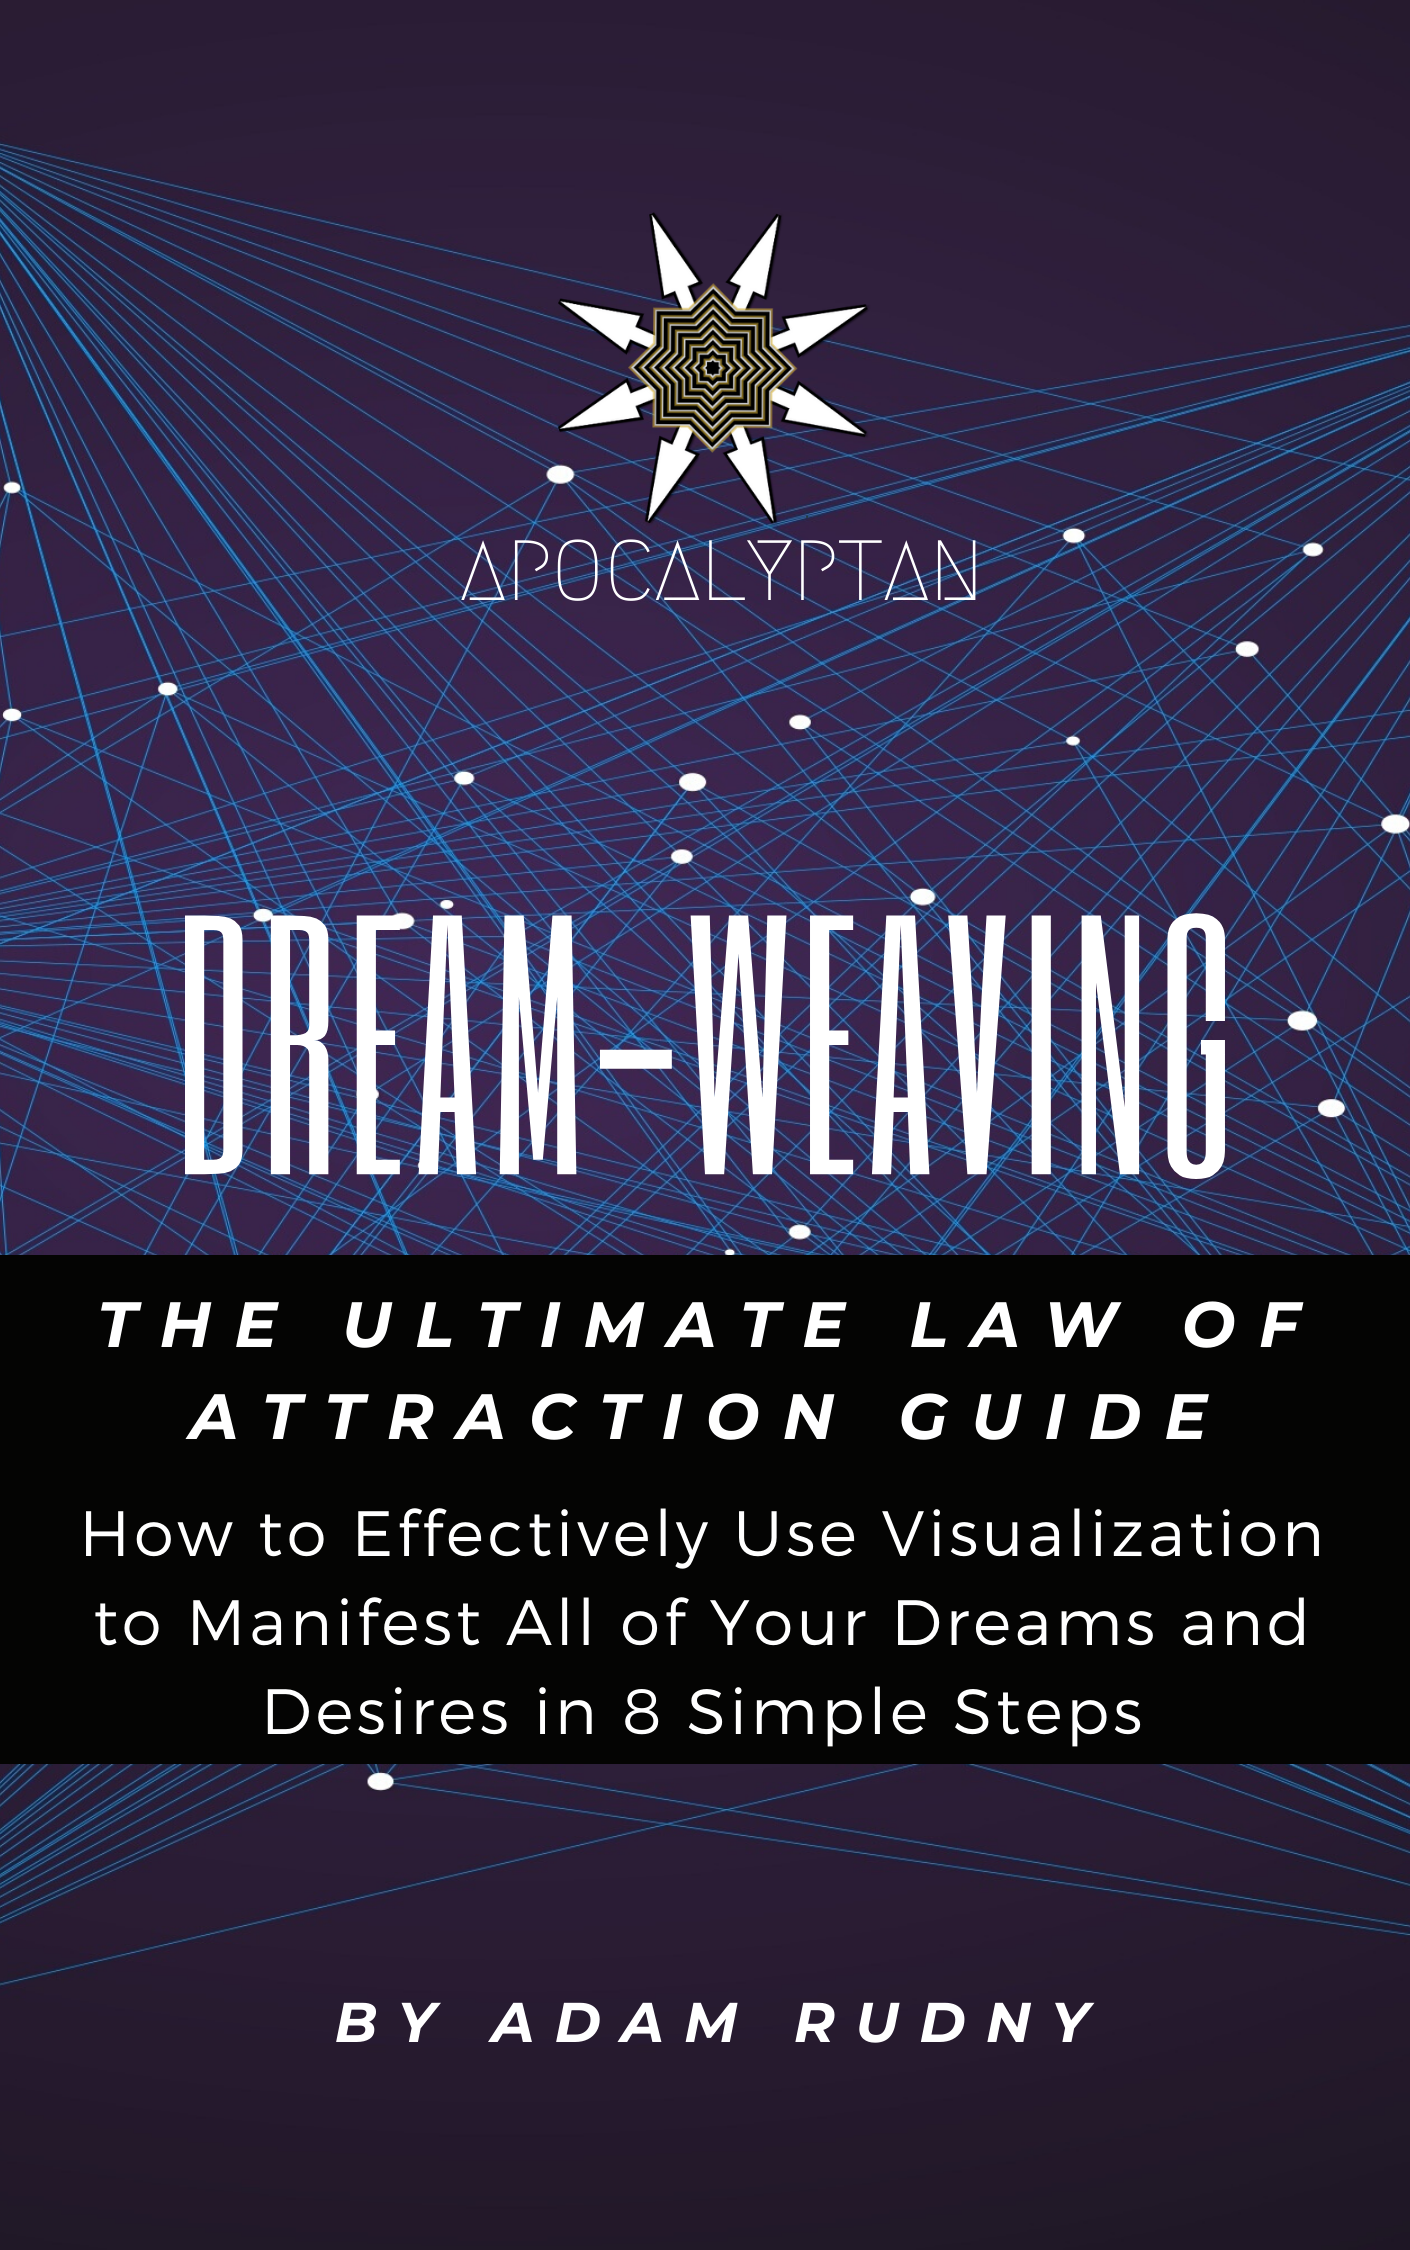 FREE: Dream-Weaving: The Ultimate Law of Attraction Guide. How to Effectively Use Visualization to Manifest All of Your Dreams and Desires in 8 Simple Steps by Adam Rudny